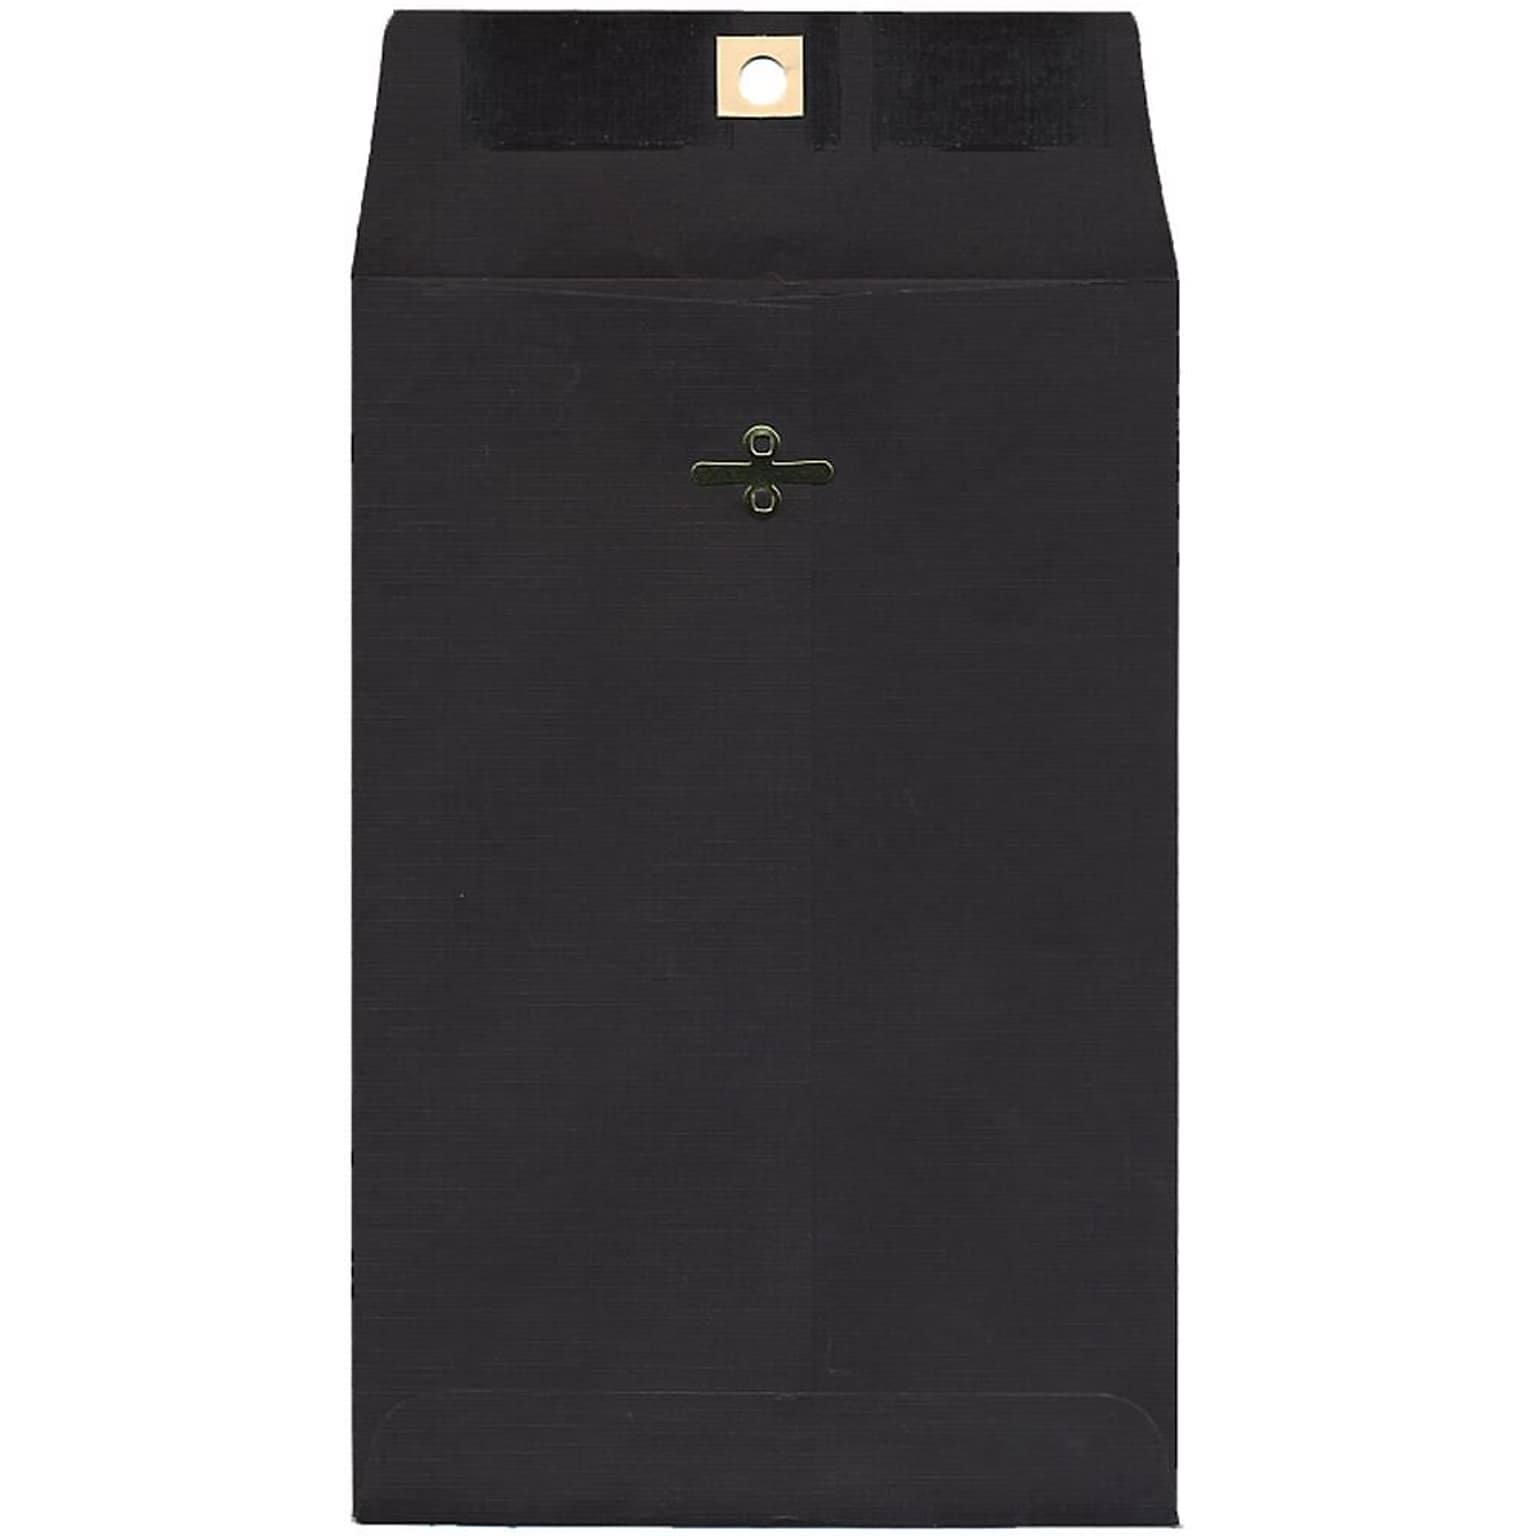 JAM Paper Open End Catalog Envelopes with Clasp Closure, 6 x 9, Black, 50/Pack (87915I)